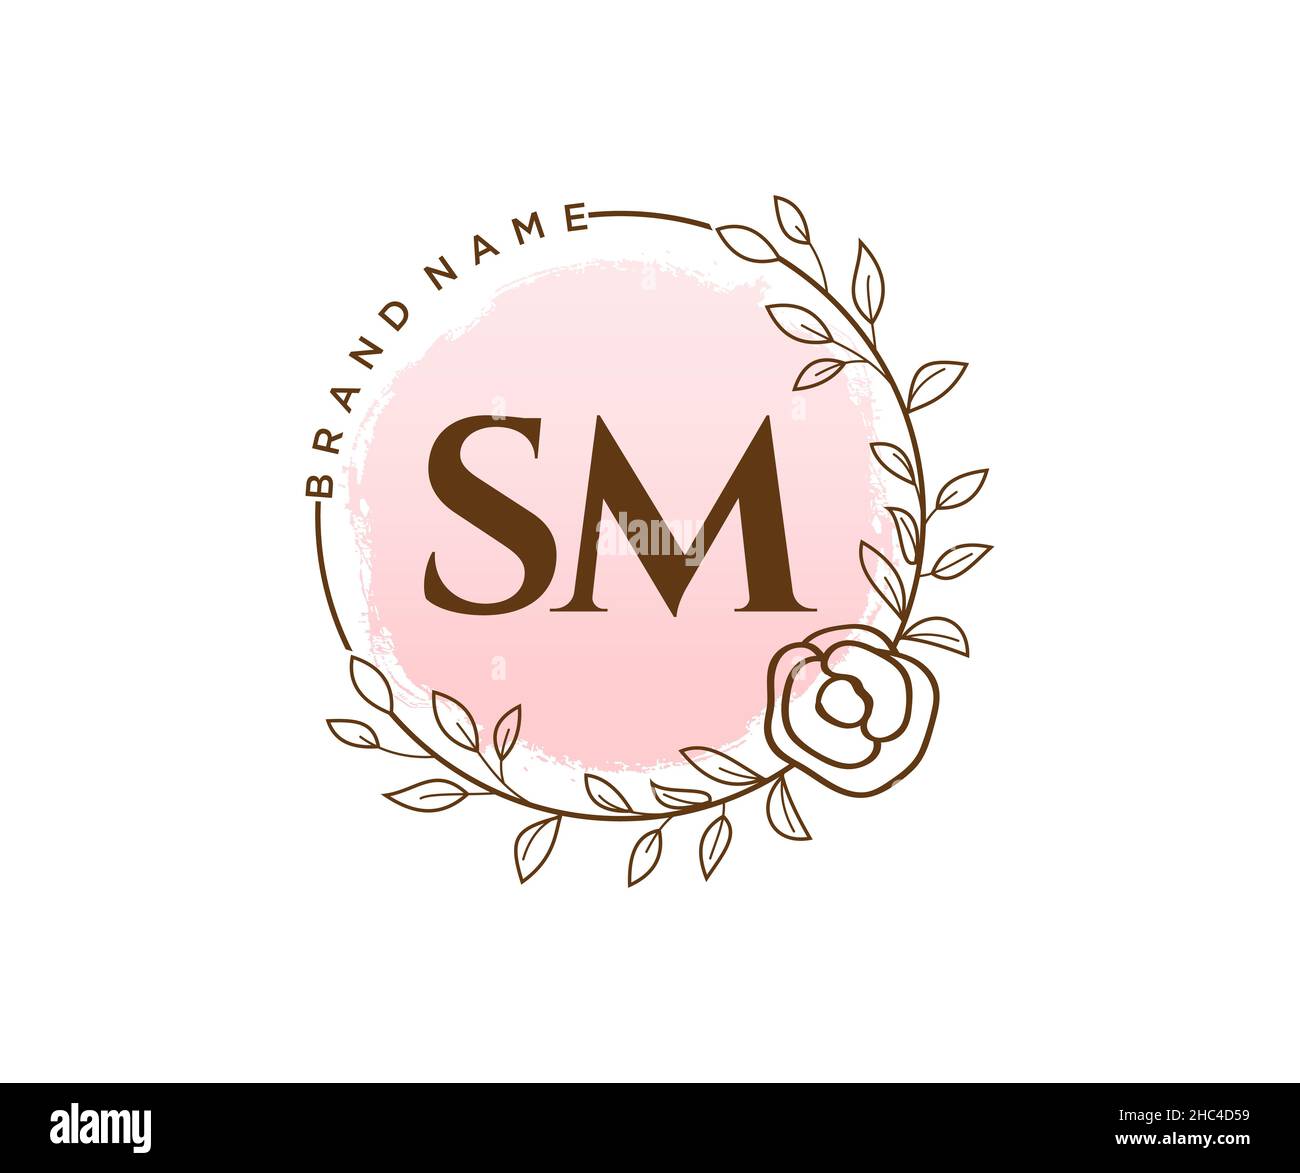 Sm logo Cut Out Stock Images & Pictures - Alamy